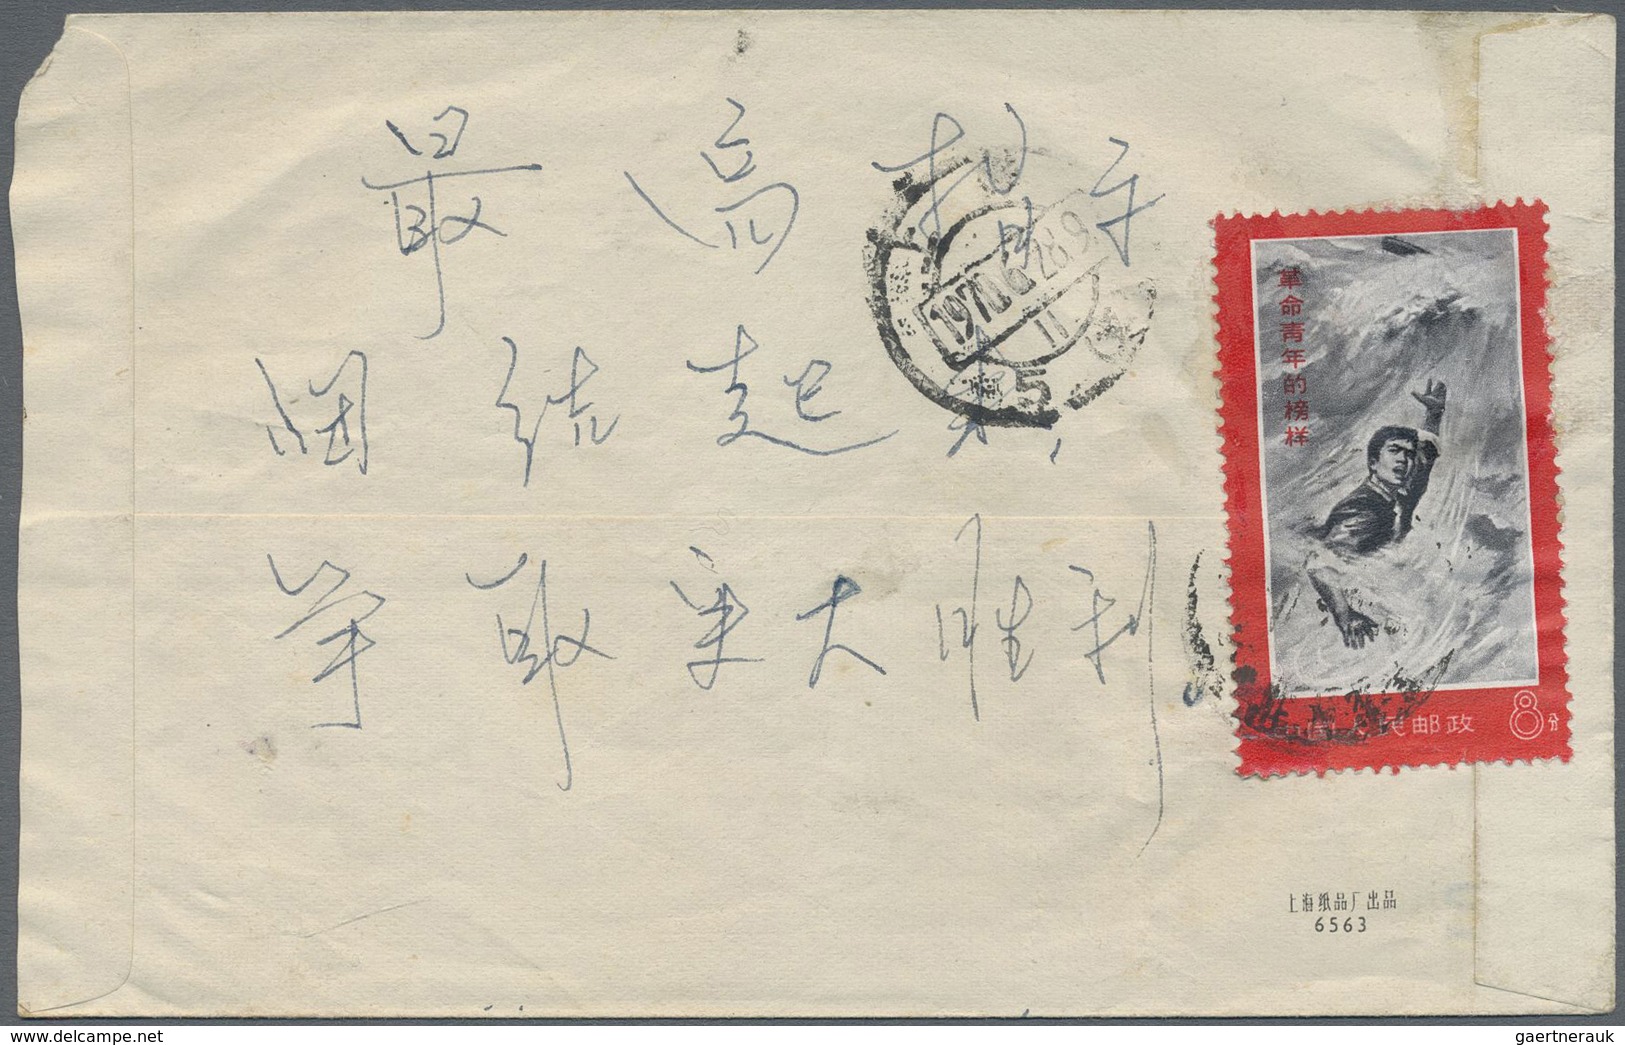 Br China - Volksrepublik: 1961/73, mostly single franks on inland covers (10) inc. interesting cultural